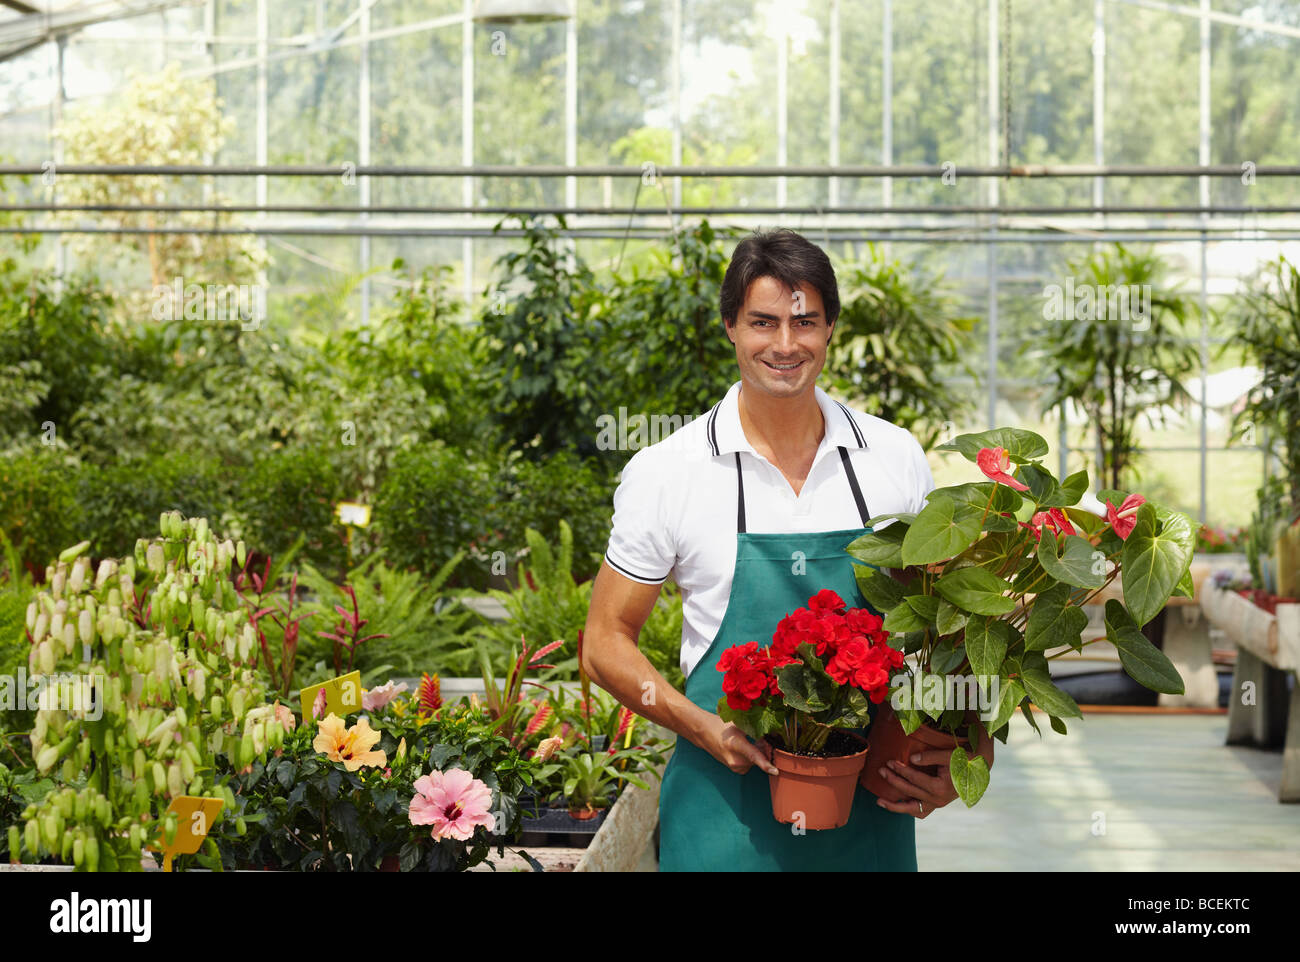 Male florist smiling and looking at camera Banque D'Images